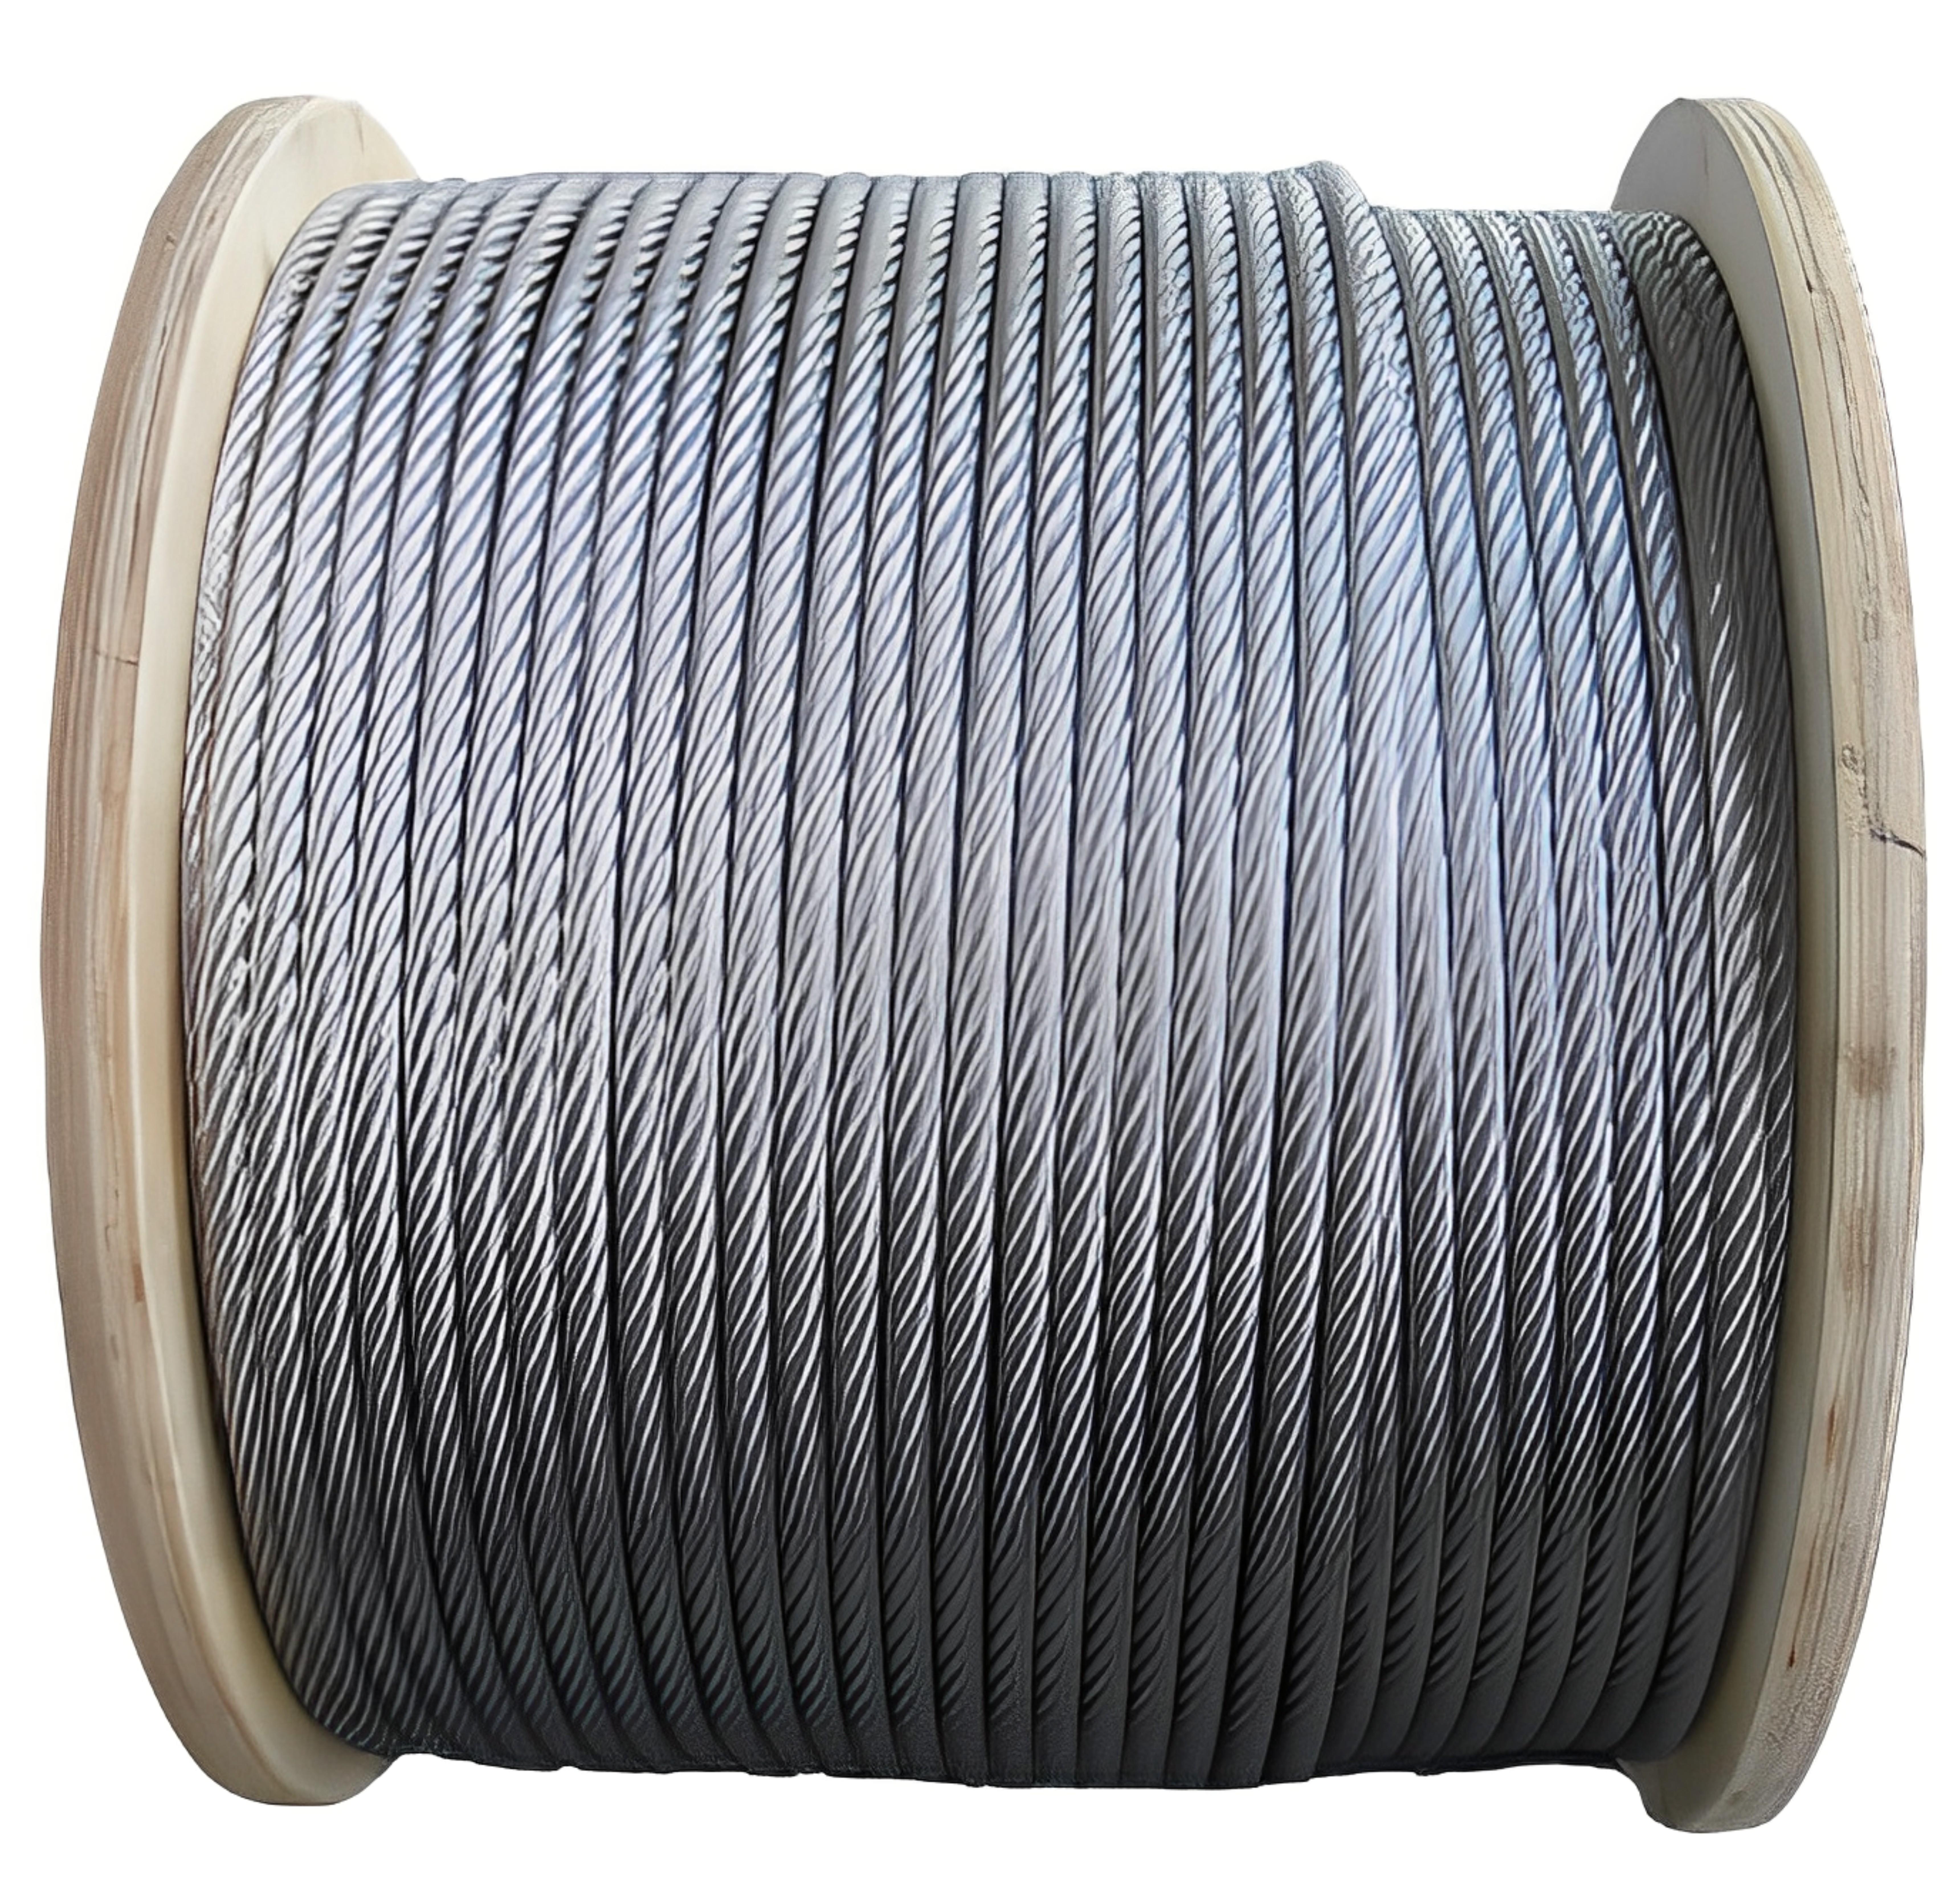 Buy 28 mm Steel Wire Rope 6 x 36 2160 N/mm2 100 - 200 m online at best  rates in India